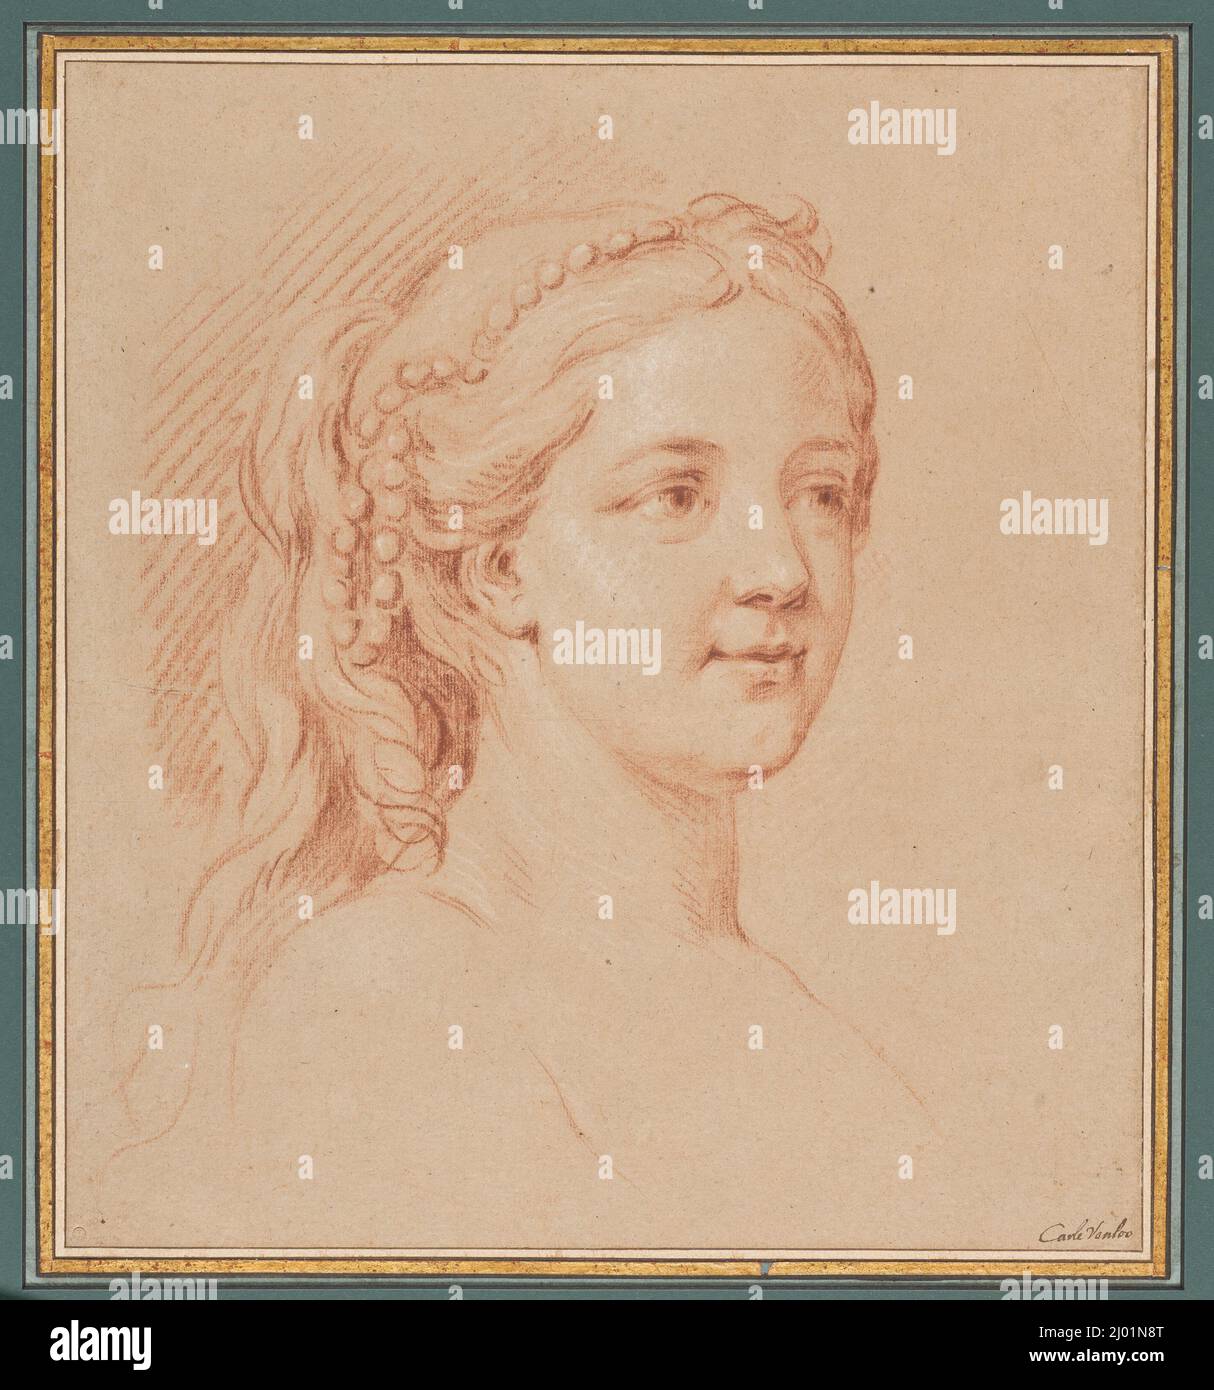 Tête de femme de trois quarts à droite. Charles-André Vanloo (called Carle Van Loo) (France, Nice, 1705 - 1765). circa 1763-1764. Drawings. Red chalk heightened with white on buff paper Stock Photo